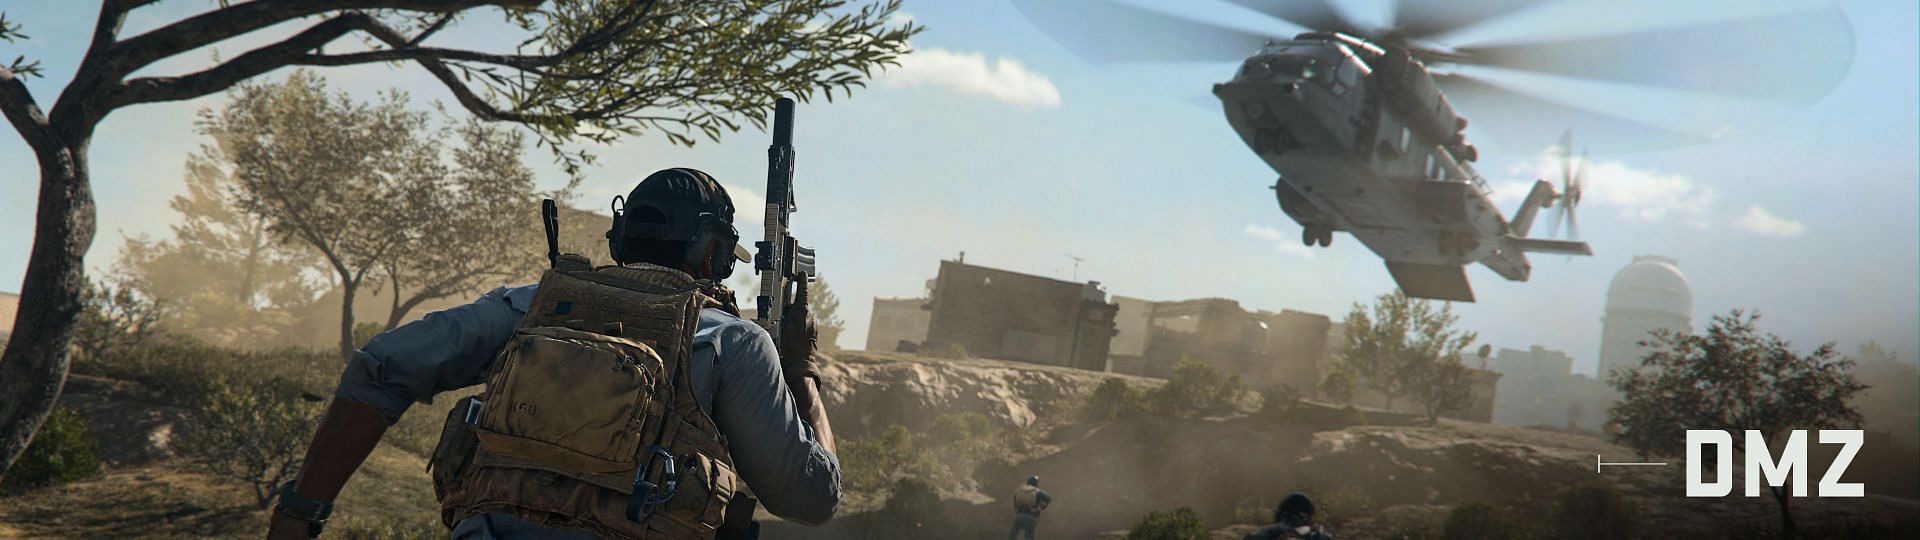 DMZ changes in Warzone 2 Season 2 reloaded (Image via Activision)